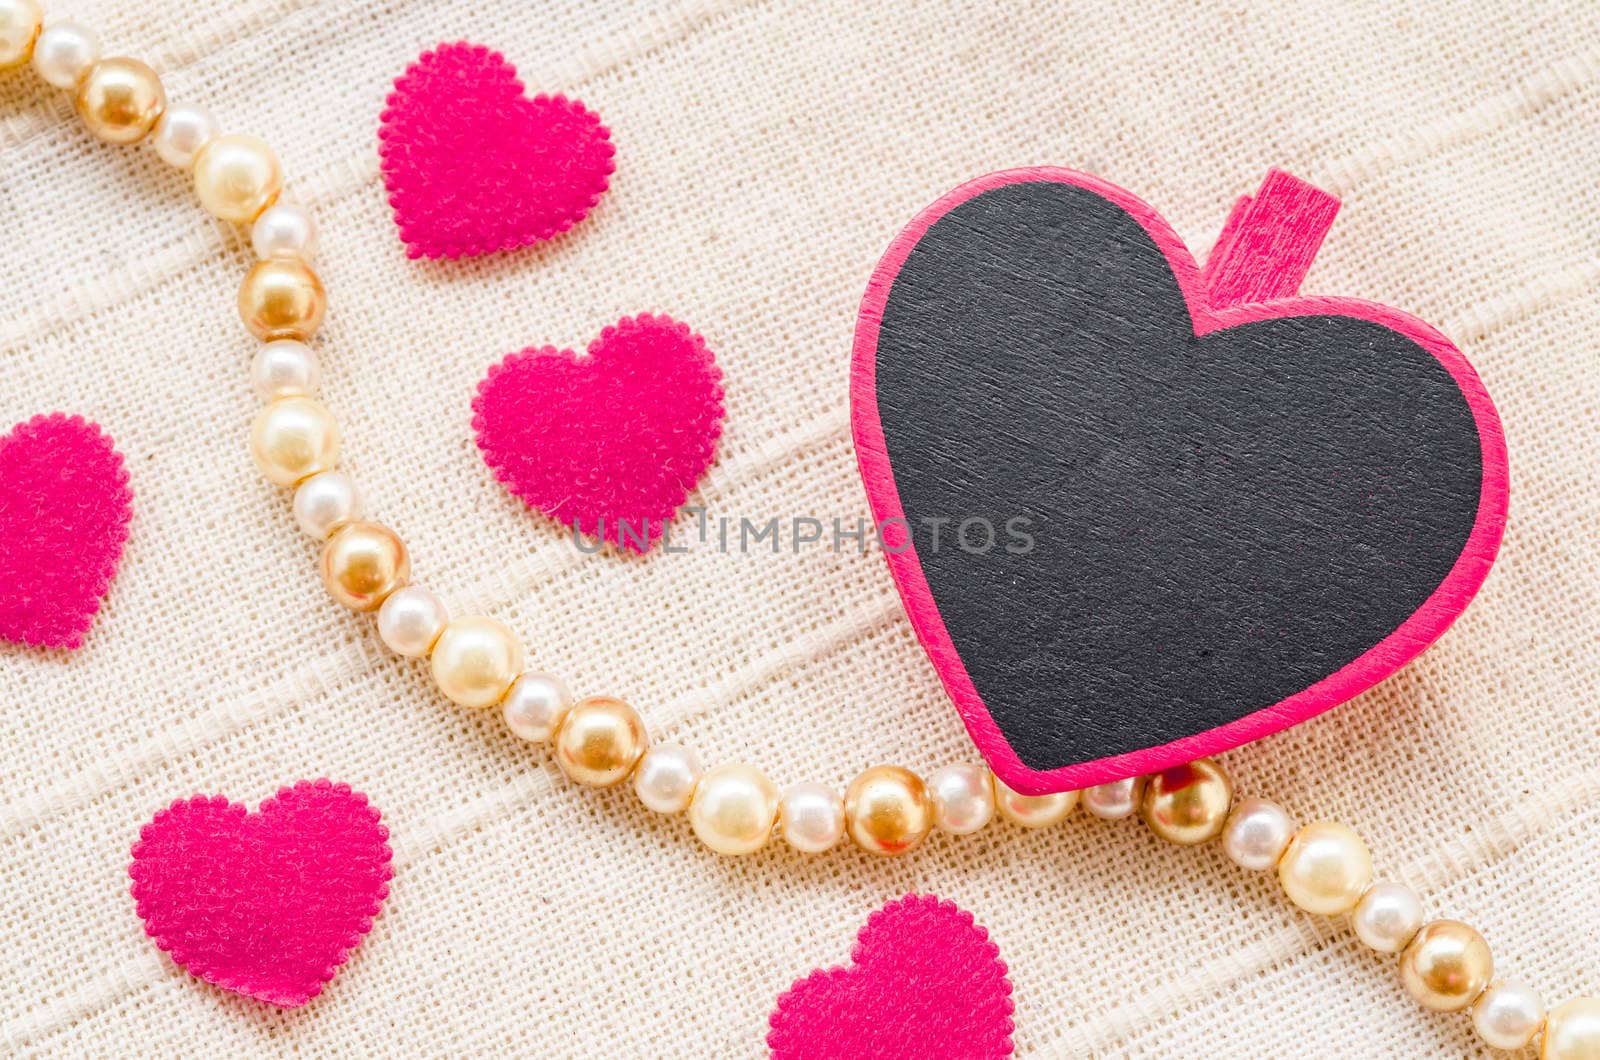 Blank pink heart wooden clamps and on fabric background.